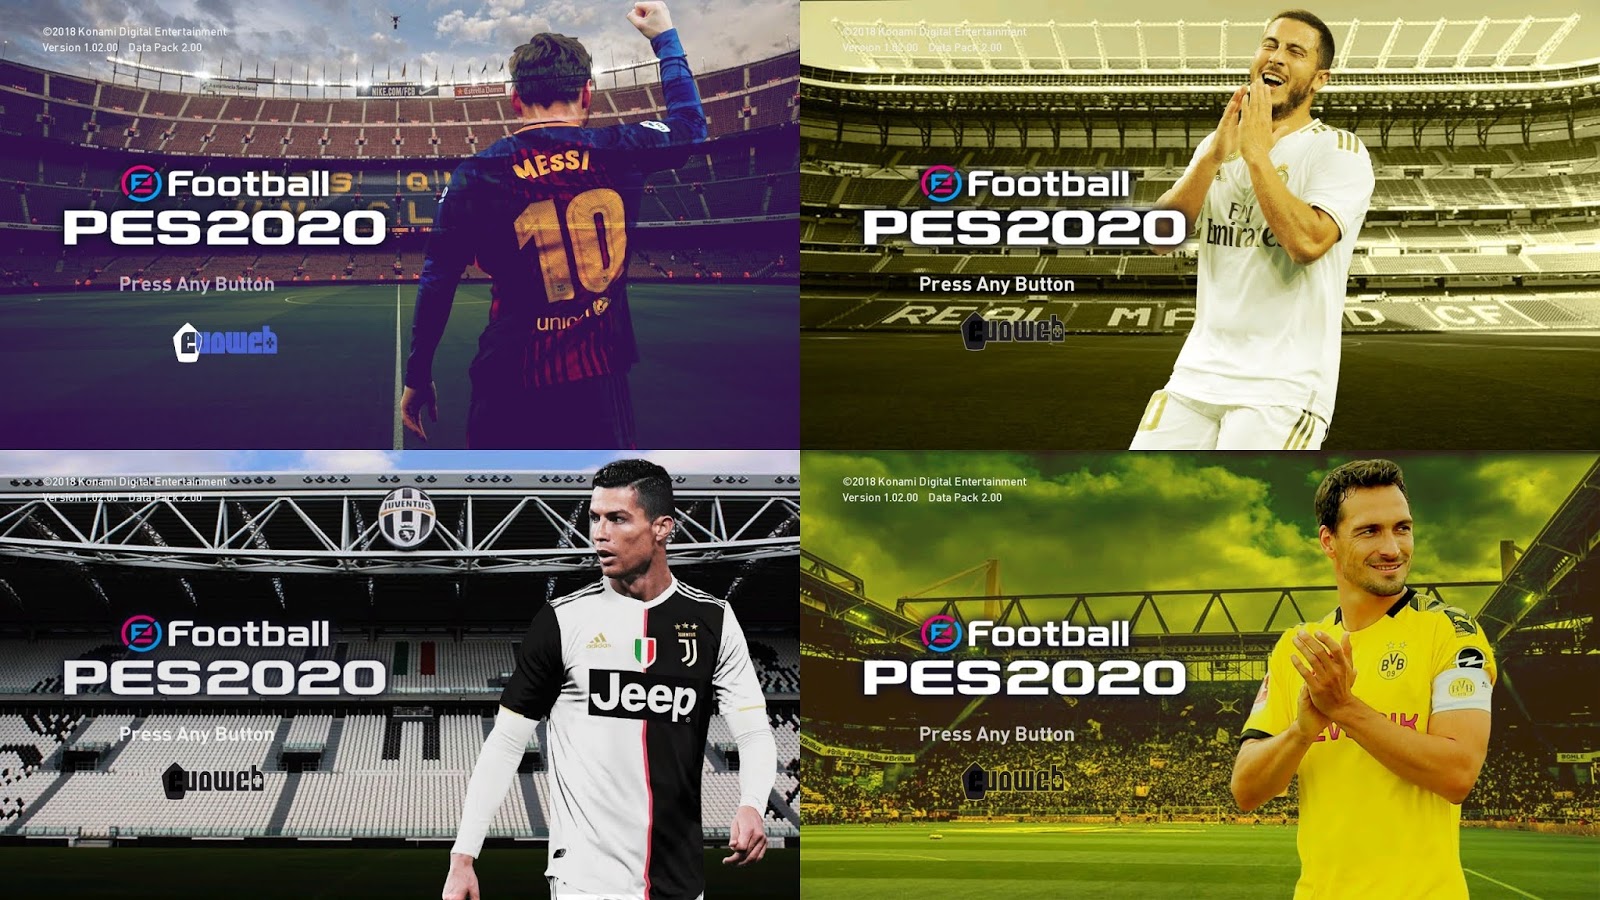 PES 2012 on Android (PPSSPP) - El Clásico 